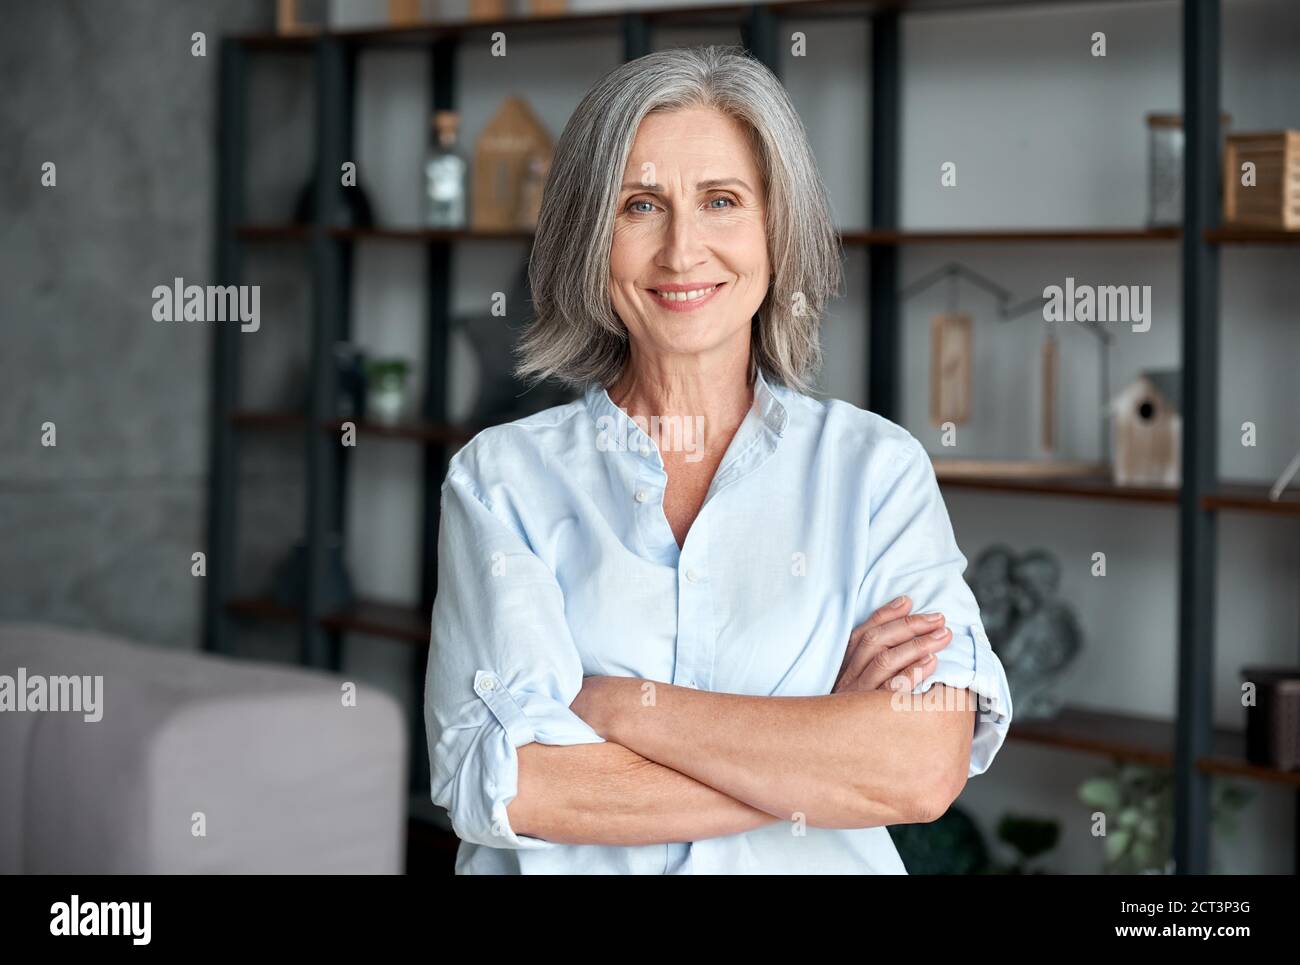 Smiling confident middle aged woman standing arms crossed in office, portrait. Stock Photo